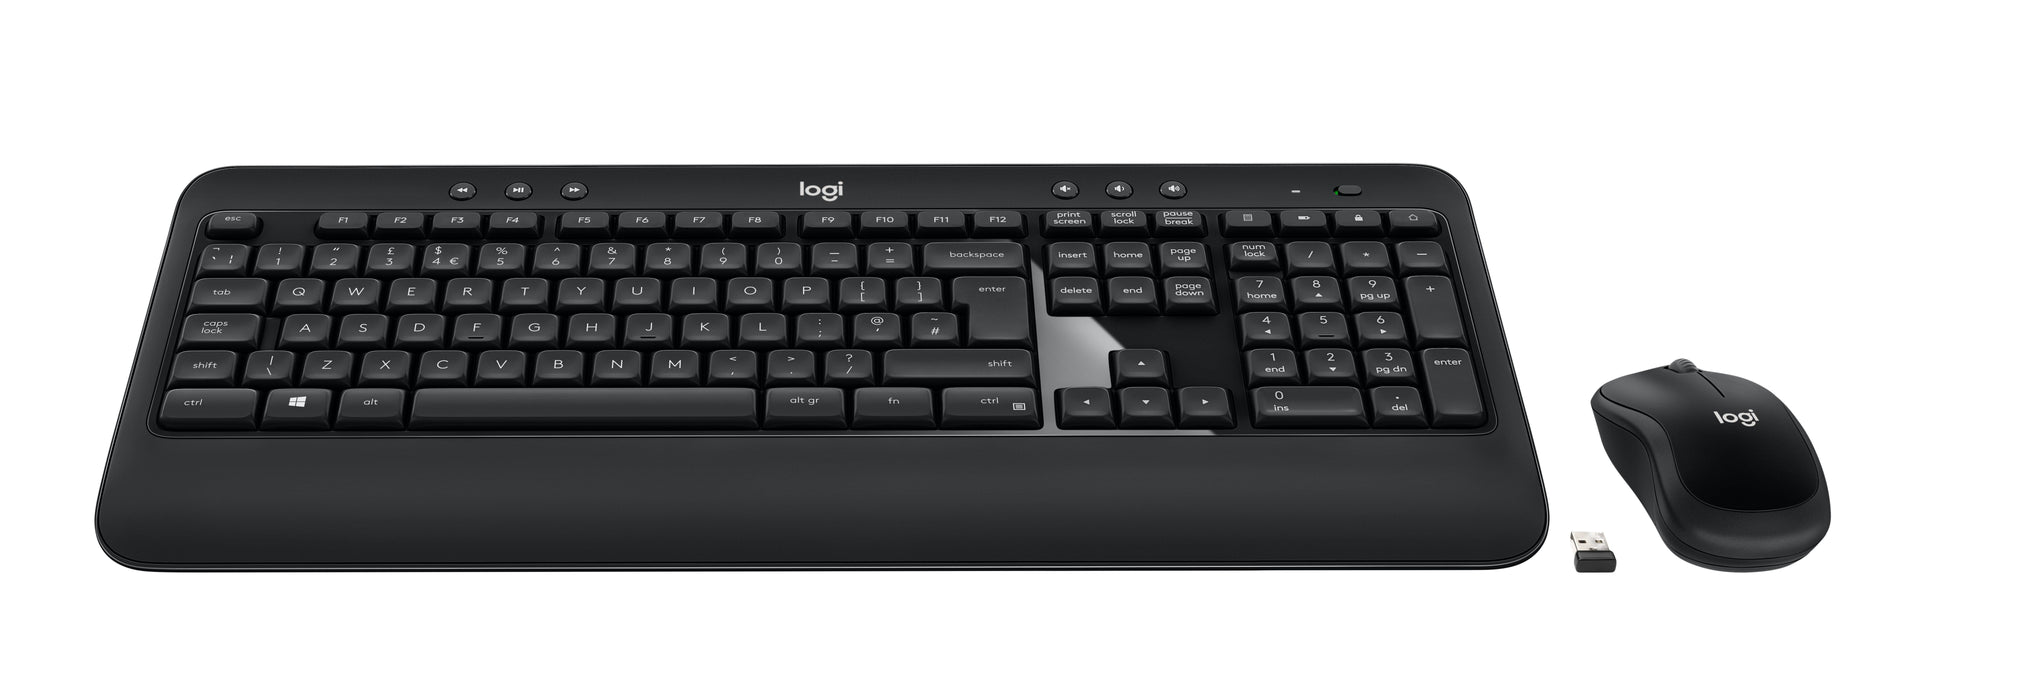 Logitech ADVANCED Combo Wireless Keyboard and Mouse, Full-size (100%), Wired, USB, QWERTY, Black, Mouse included